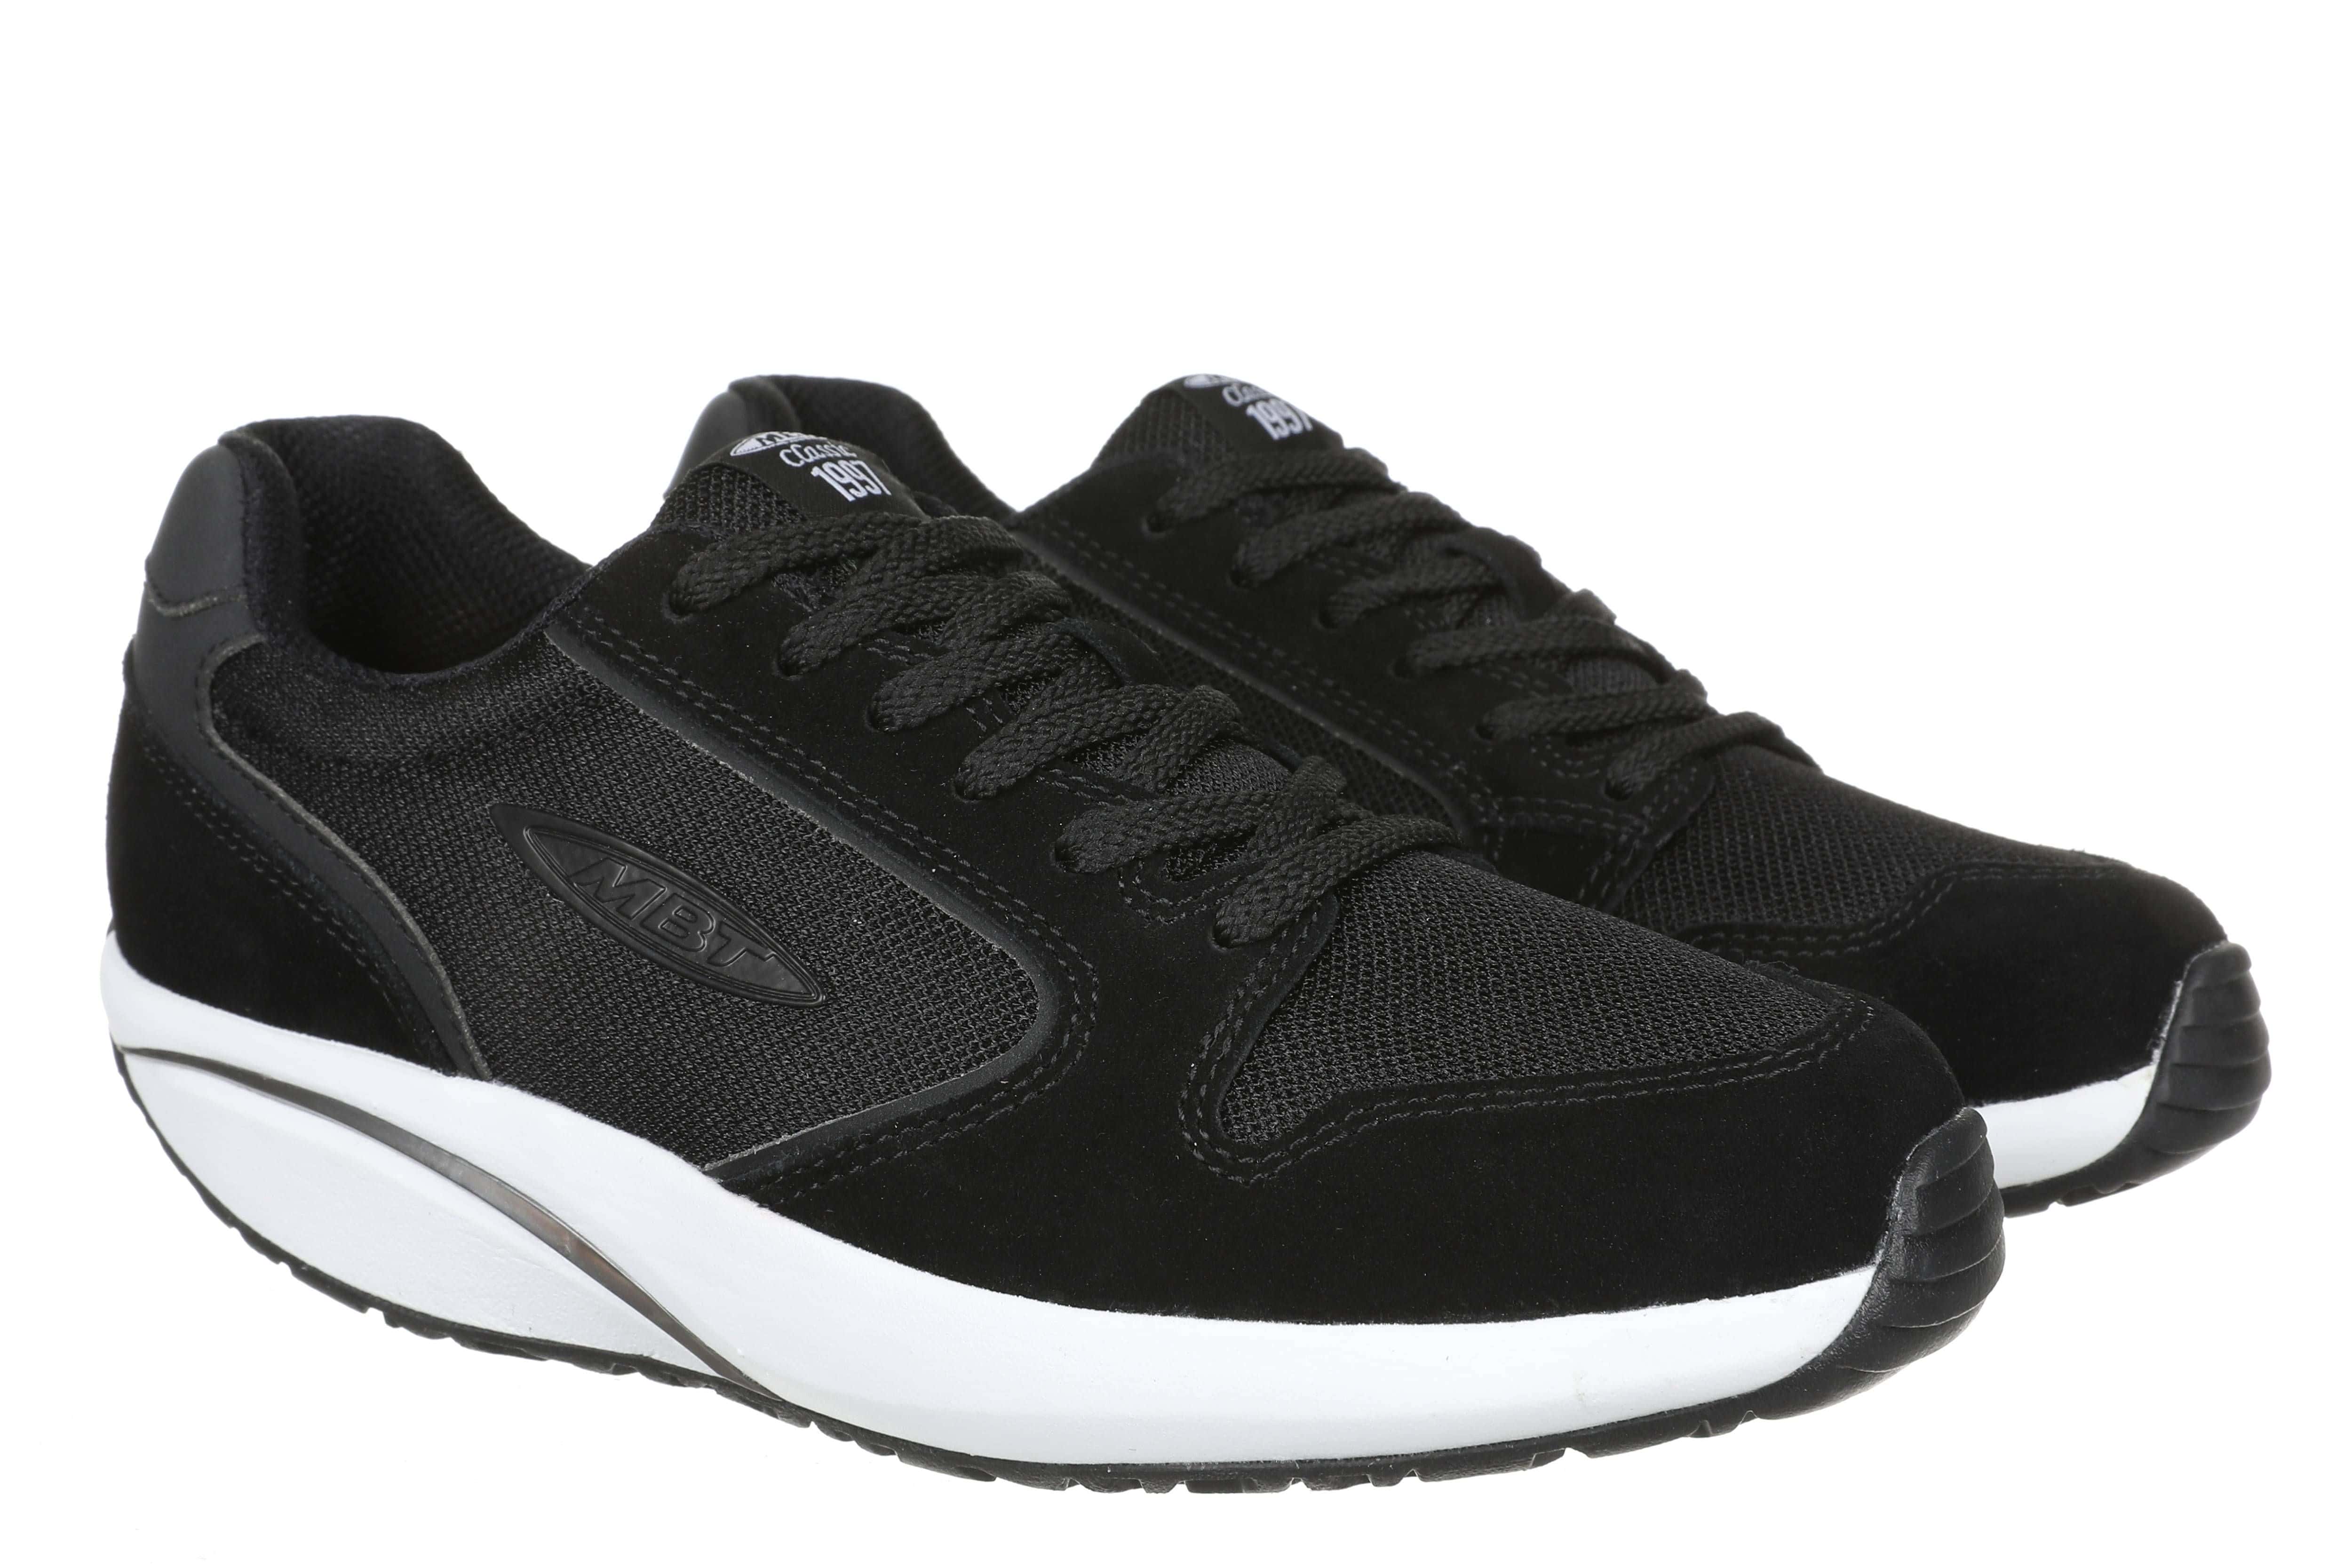 MBT SNEAKERS WOMAN MBT-1997 CLASSIC W BLACK/WHITE